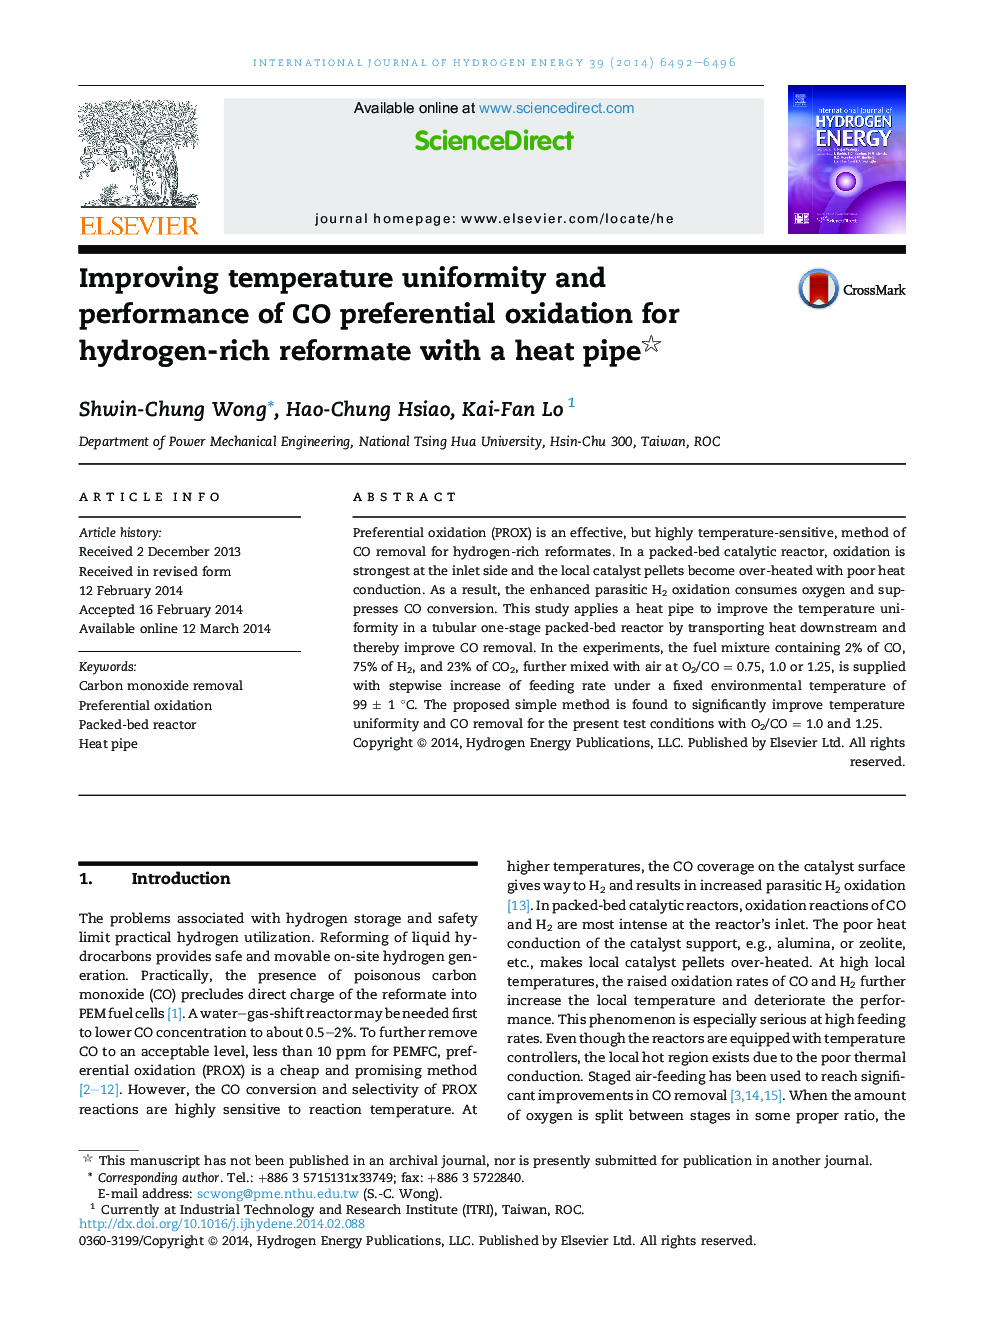 Improving temperature uniformity and performance of CO preferential oxidation for hydrogen-rich reformate with a heat pipe 